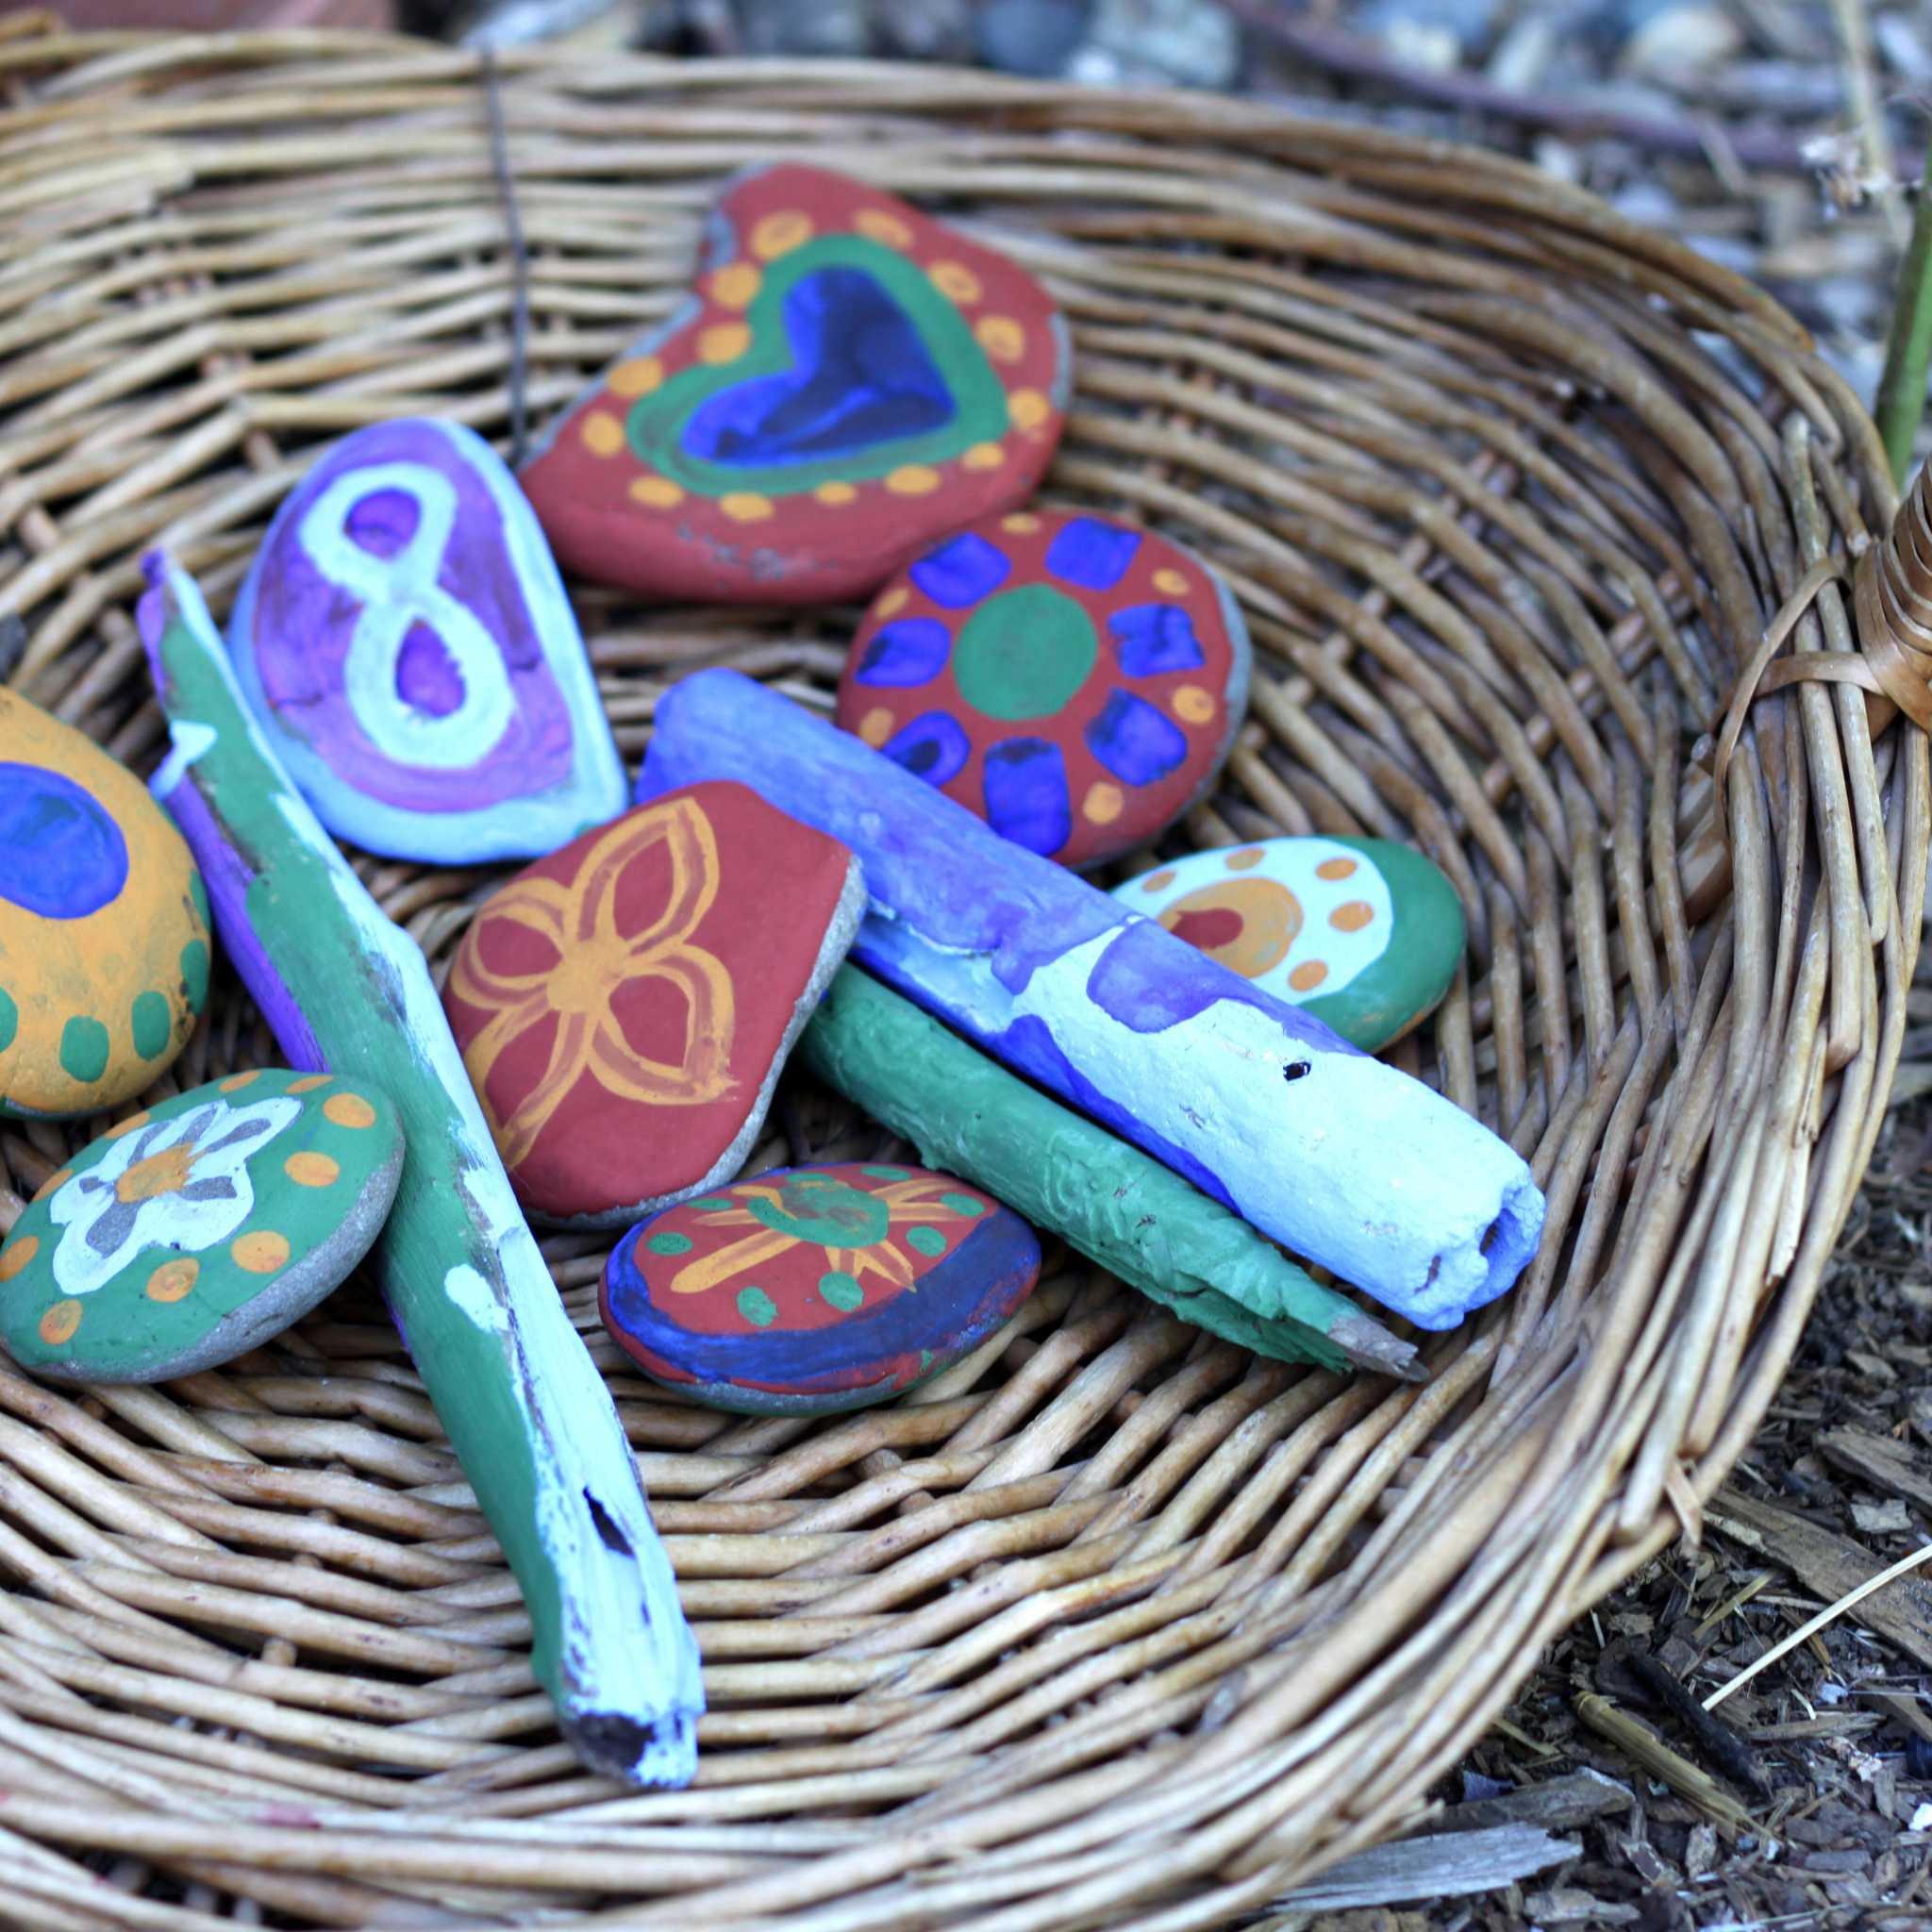 Natural Earth Paint Kit - Discovery - Painted On Rocks & Sticks In Basket